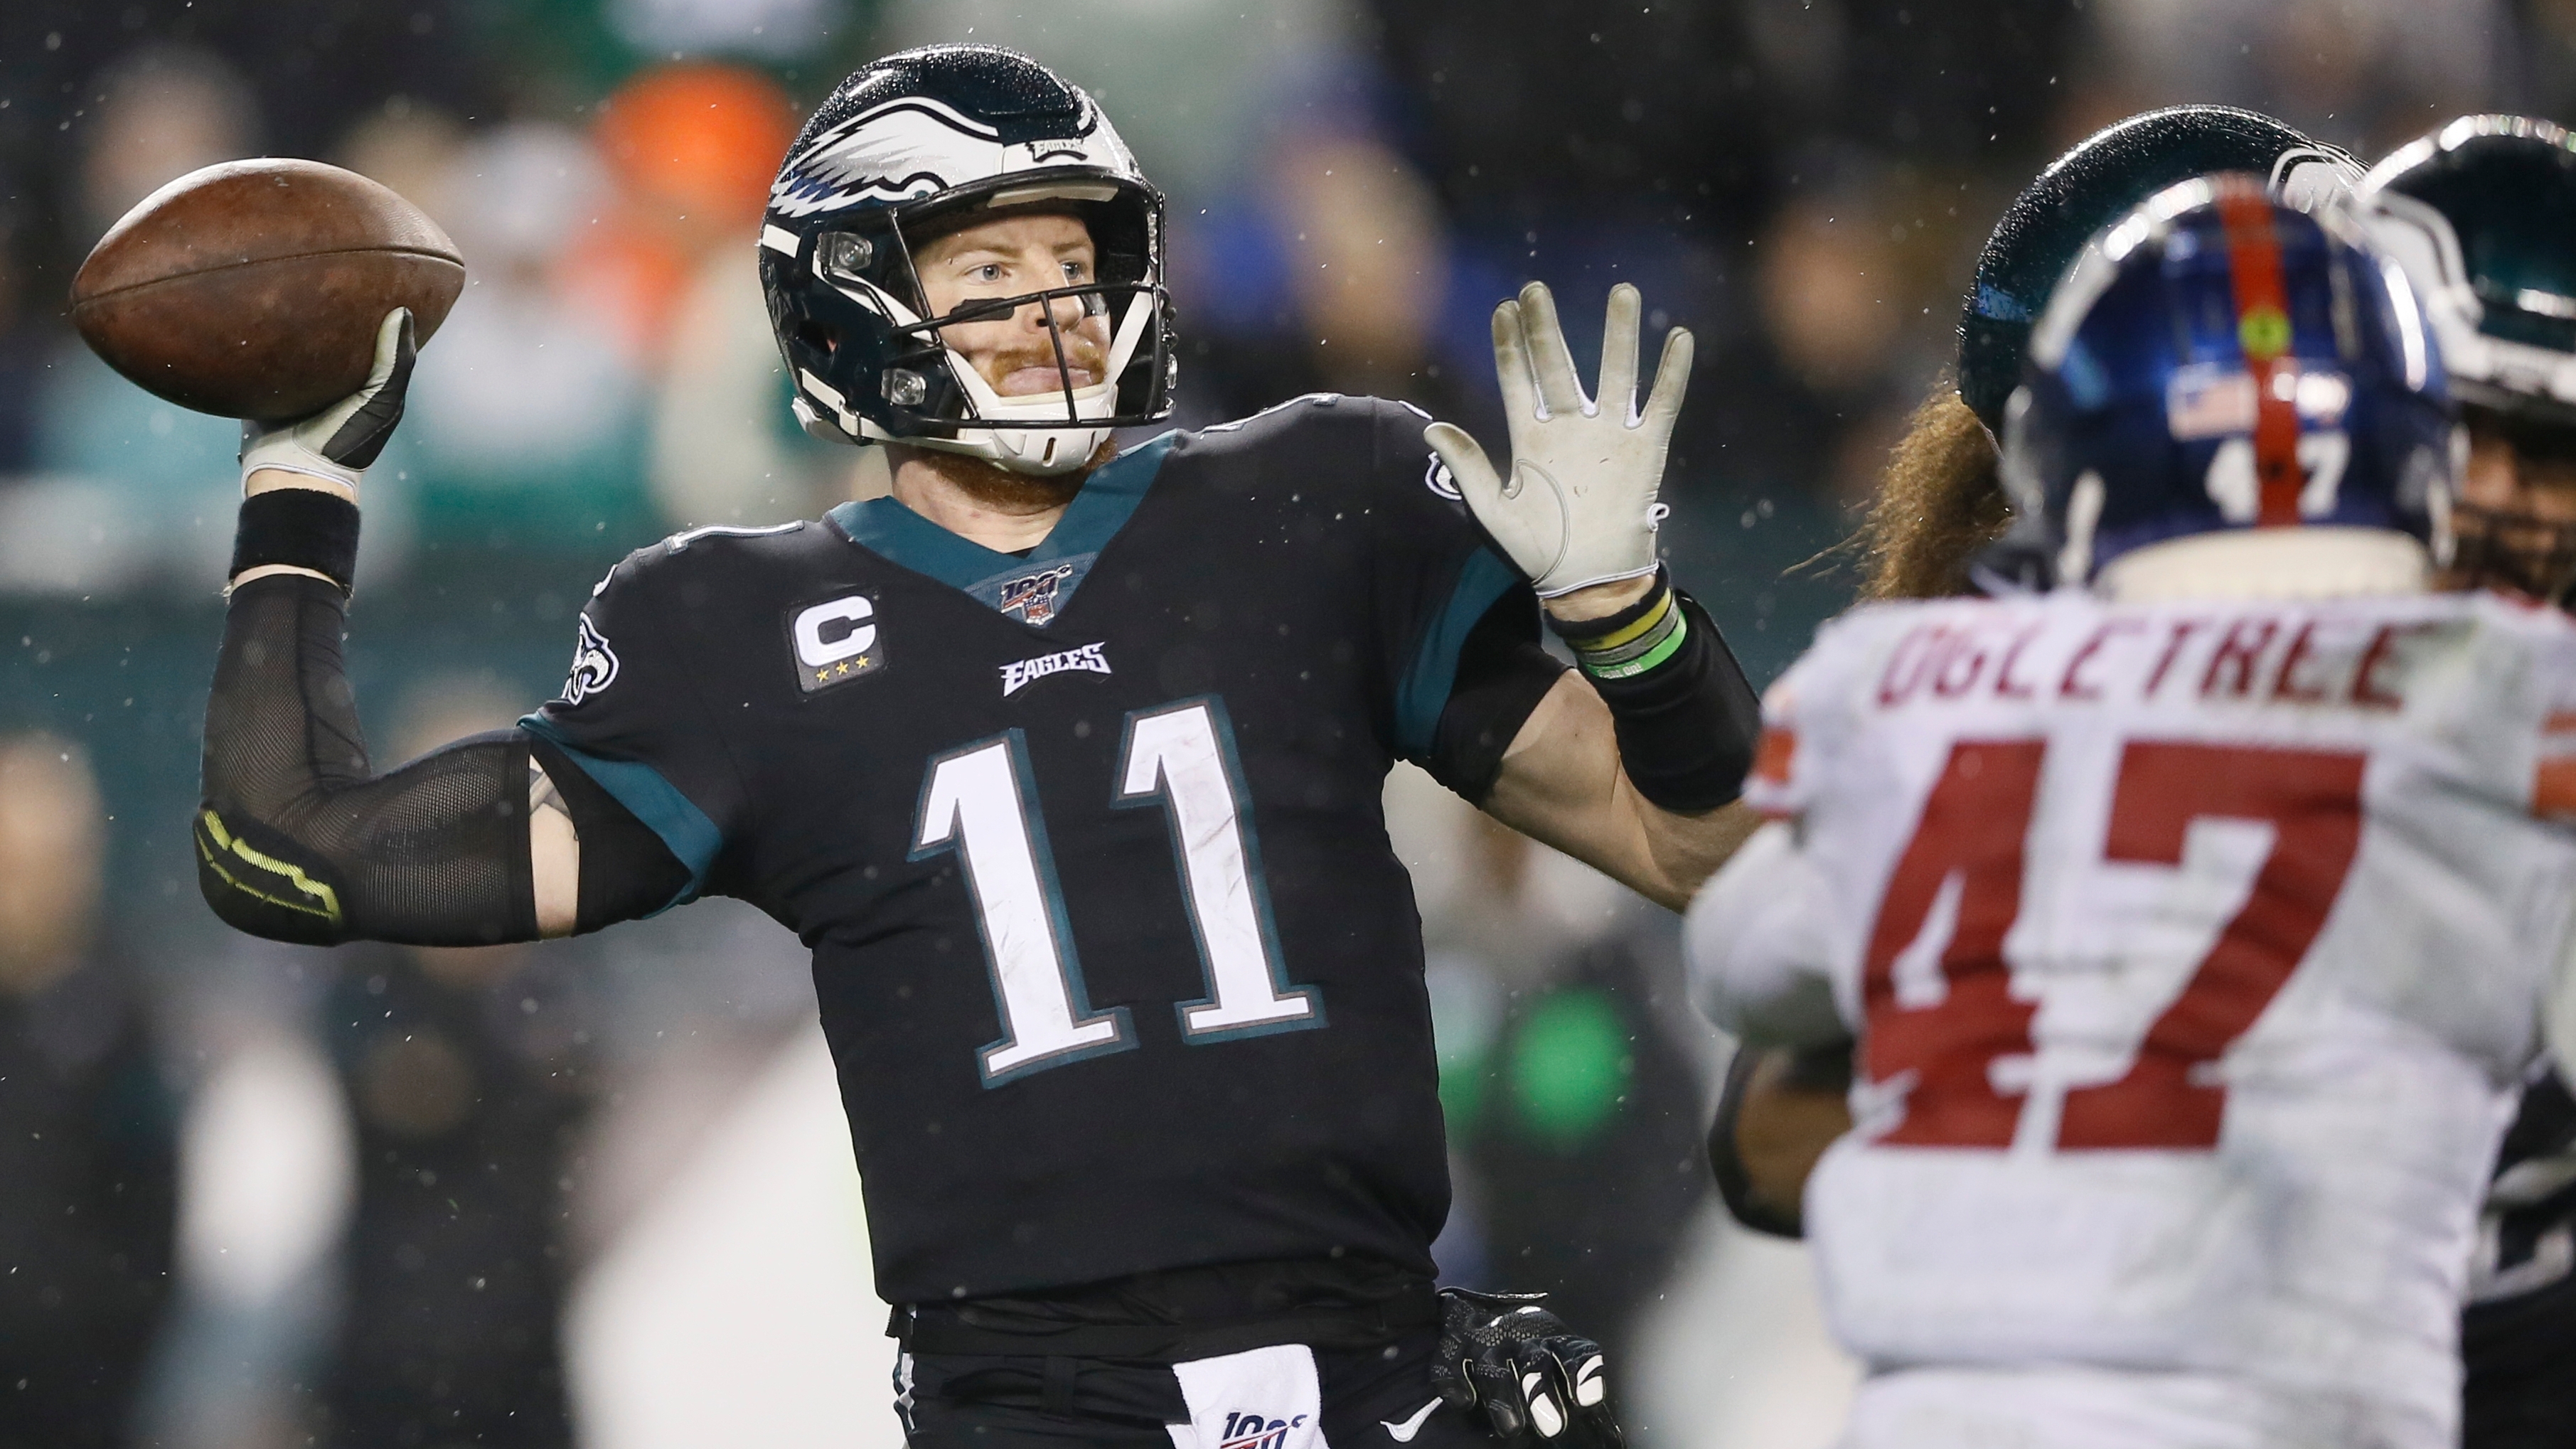 Colts, Eagles make Wentz trade official